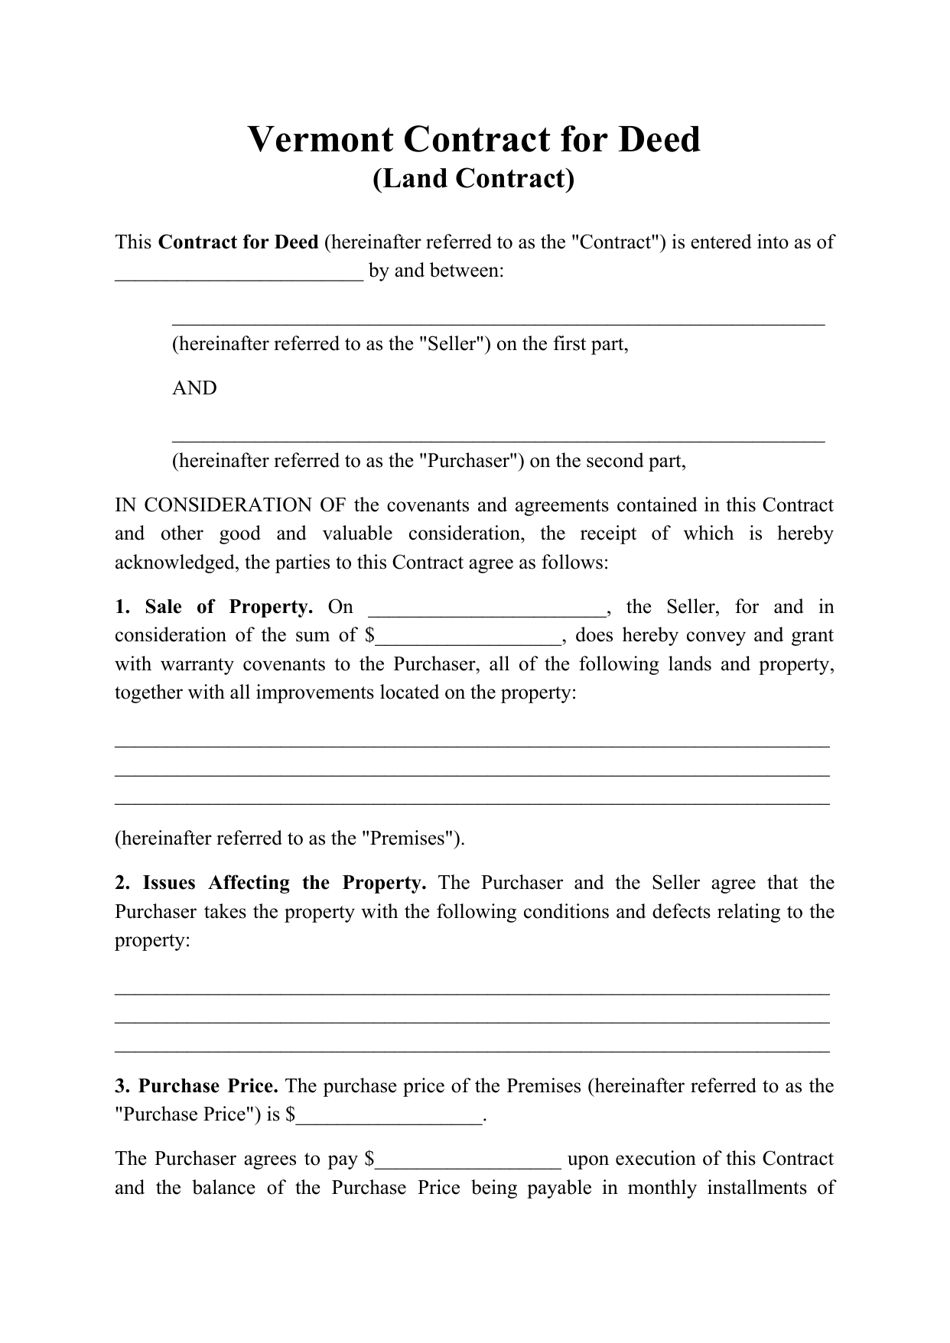 Contract for Deed (Land Contract) - Vermont, Page 1